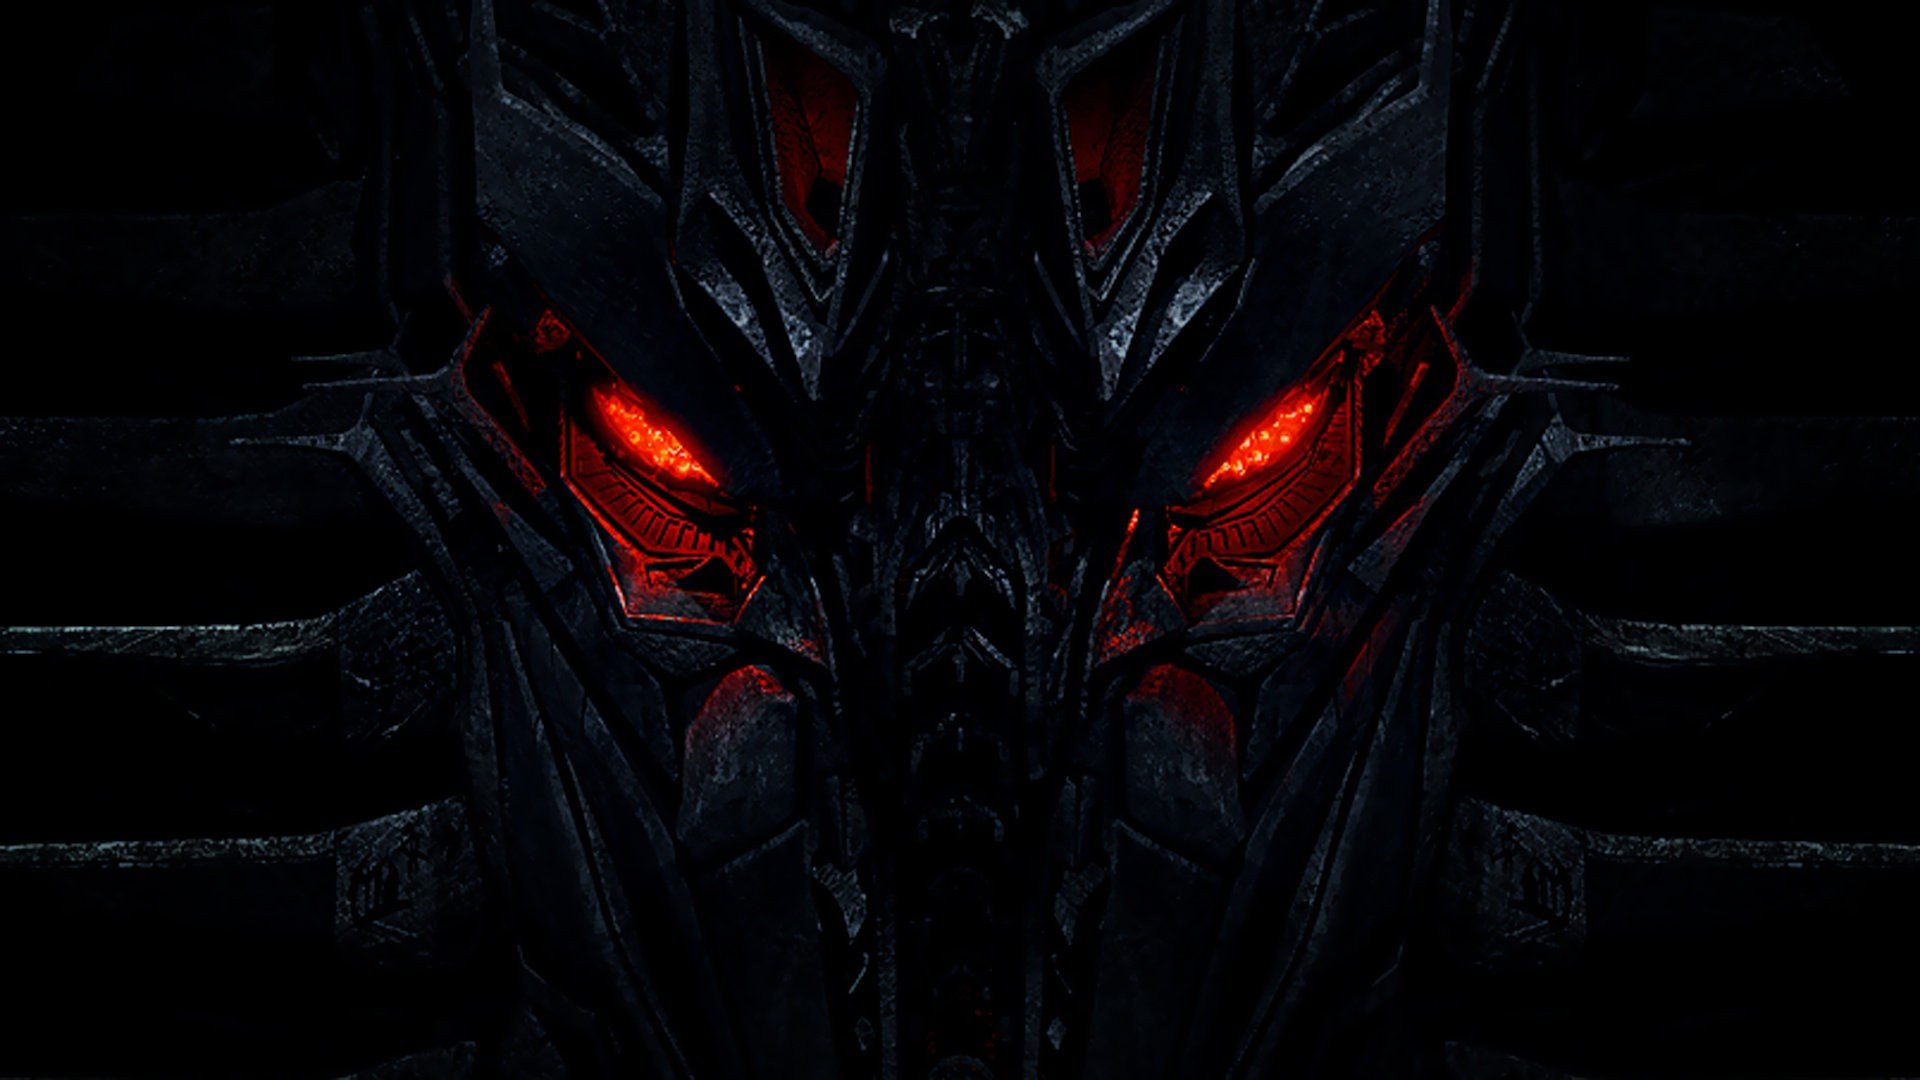 Transformers: Revenge of the Fallen download the new version for windows